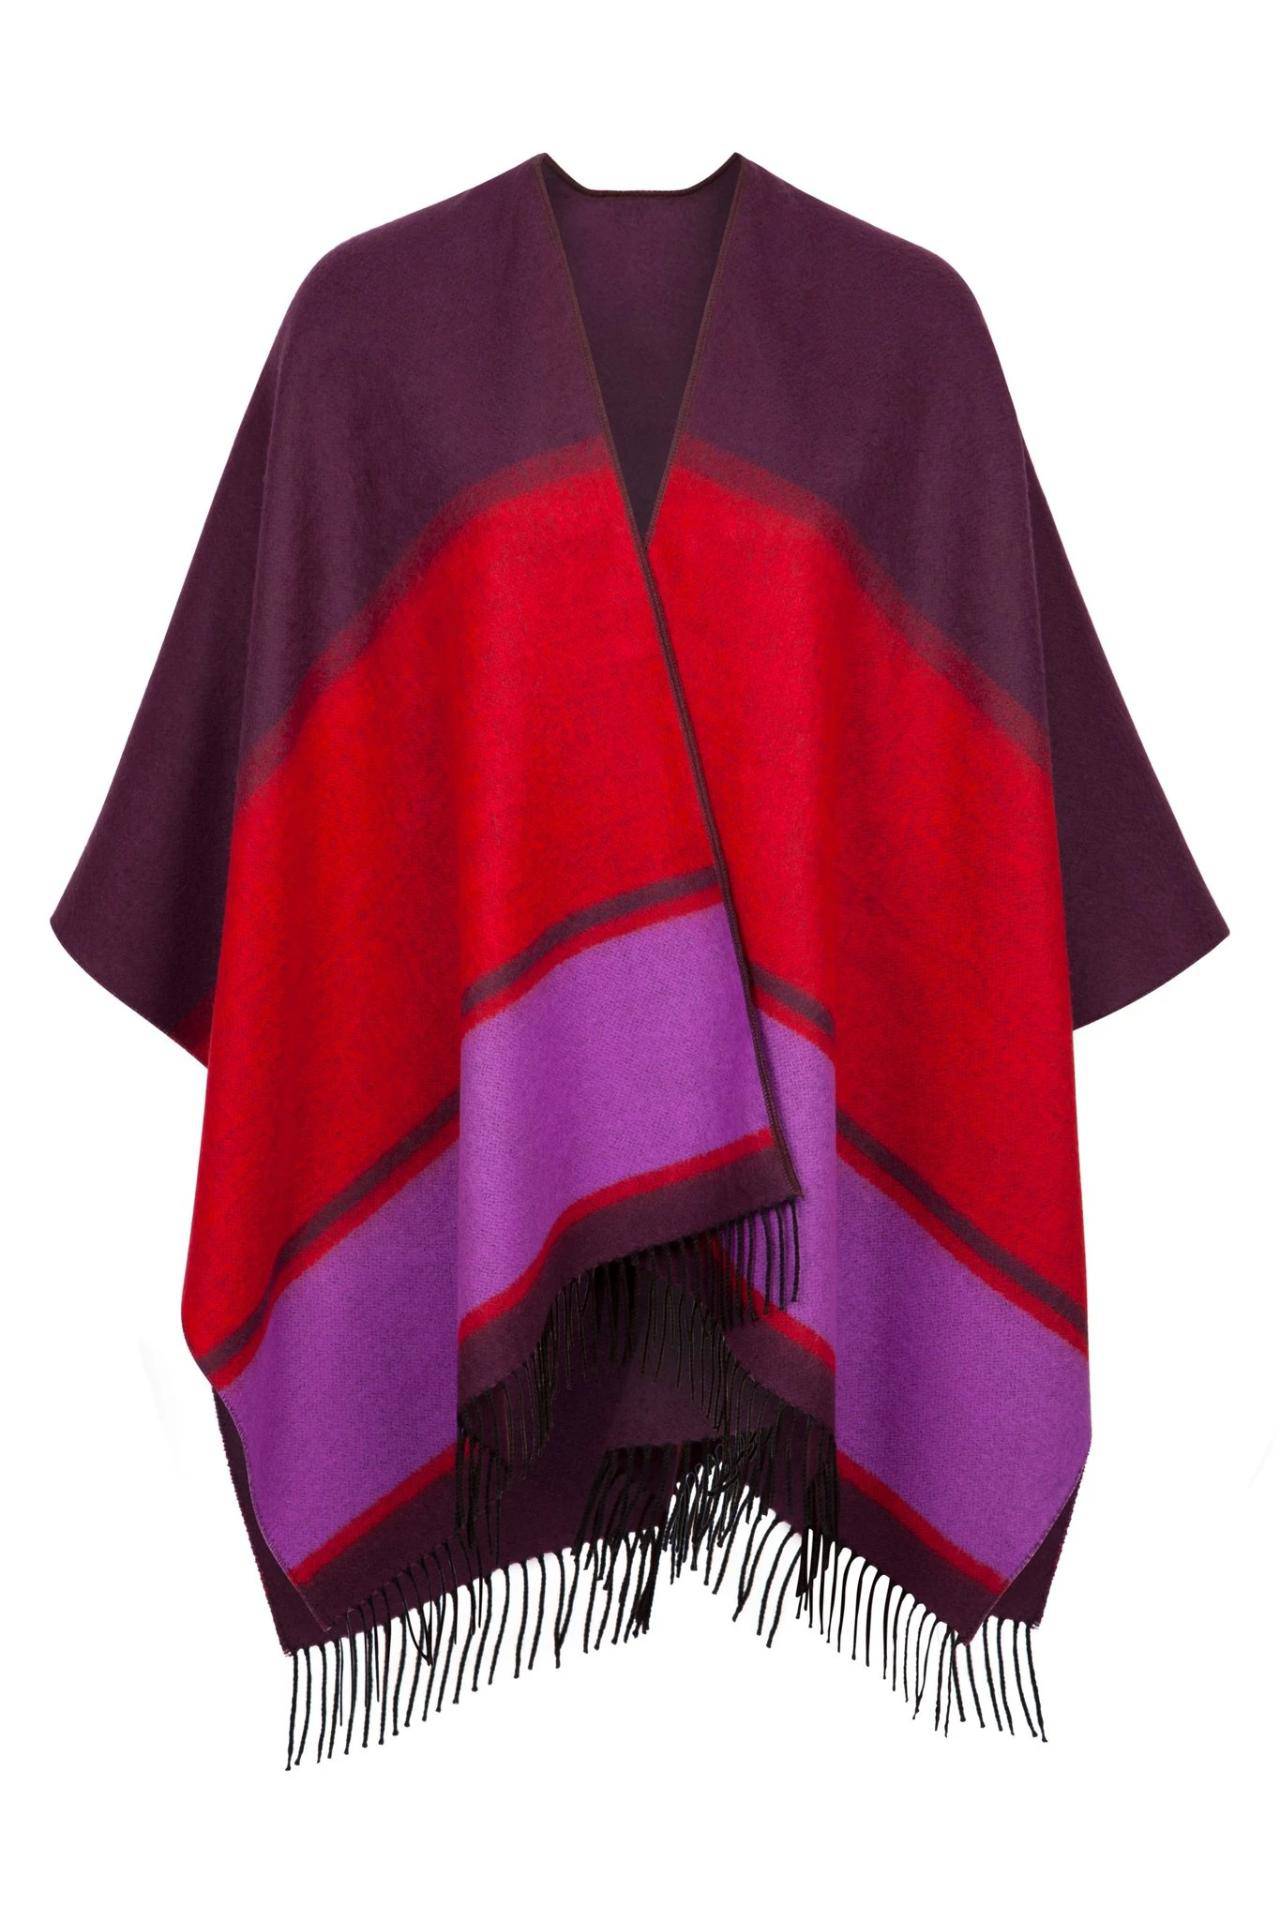 Jimmy Hourihan Fringed Shawl in Wine/Red/Lilac Color Panels